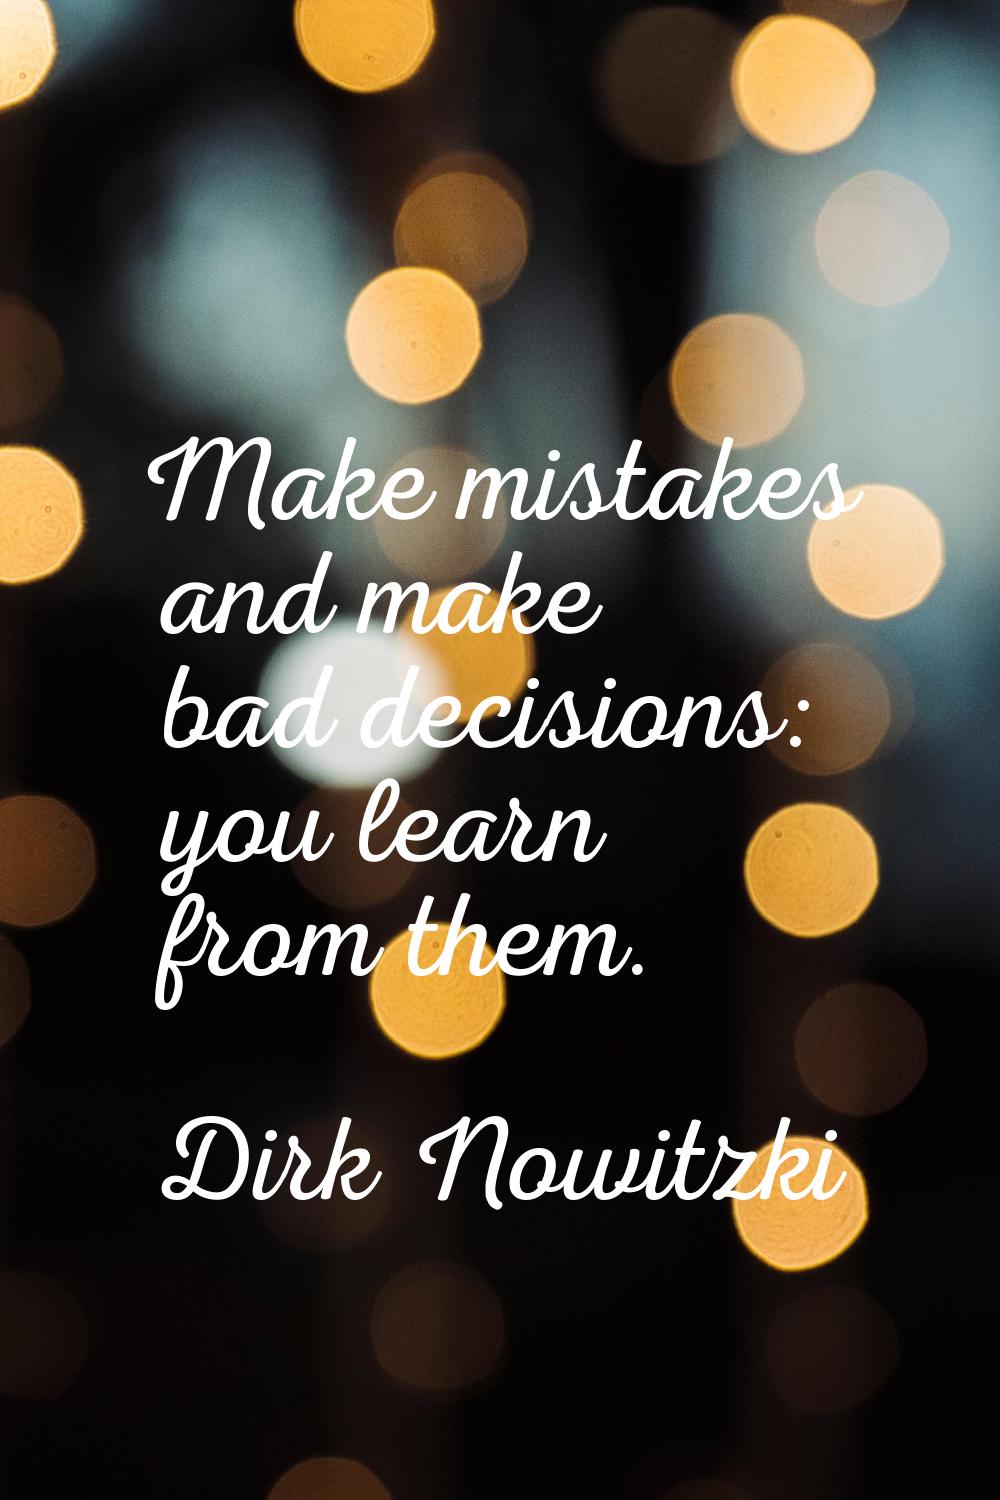 Make mistakes and make bad decisions: you learn from them.